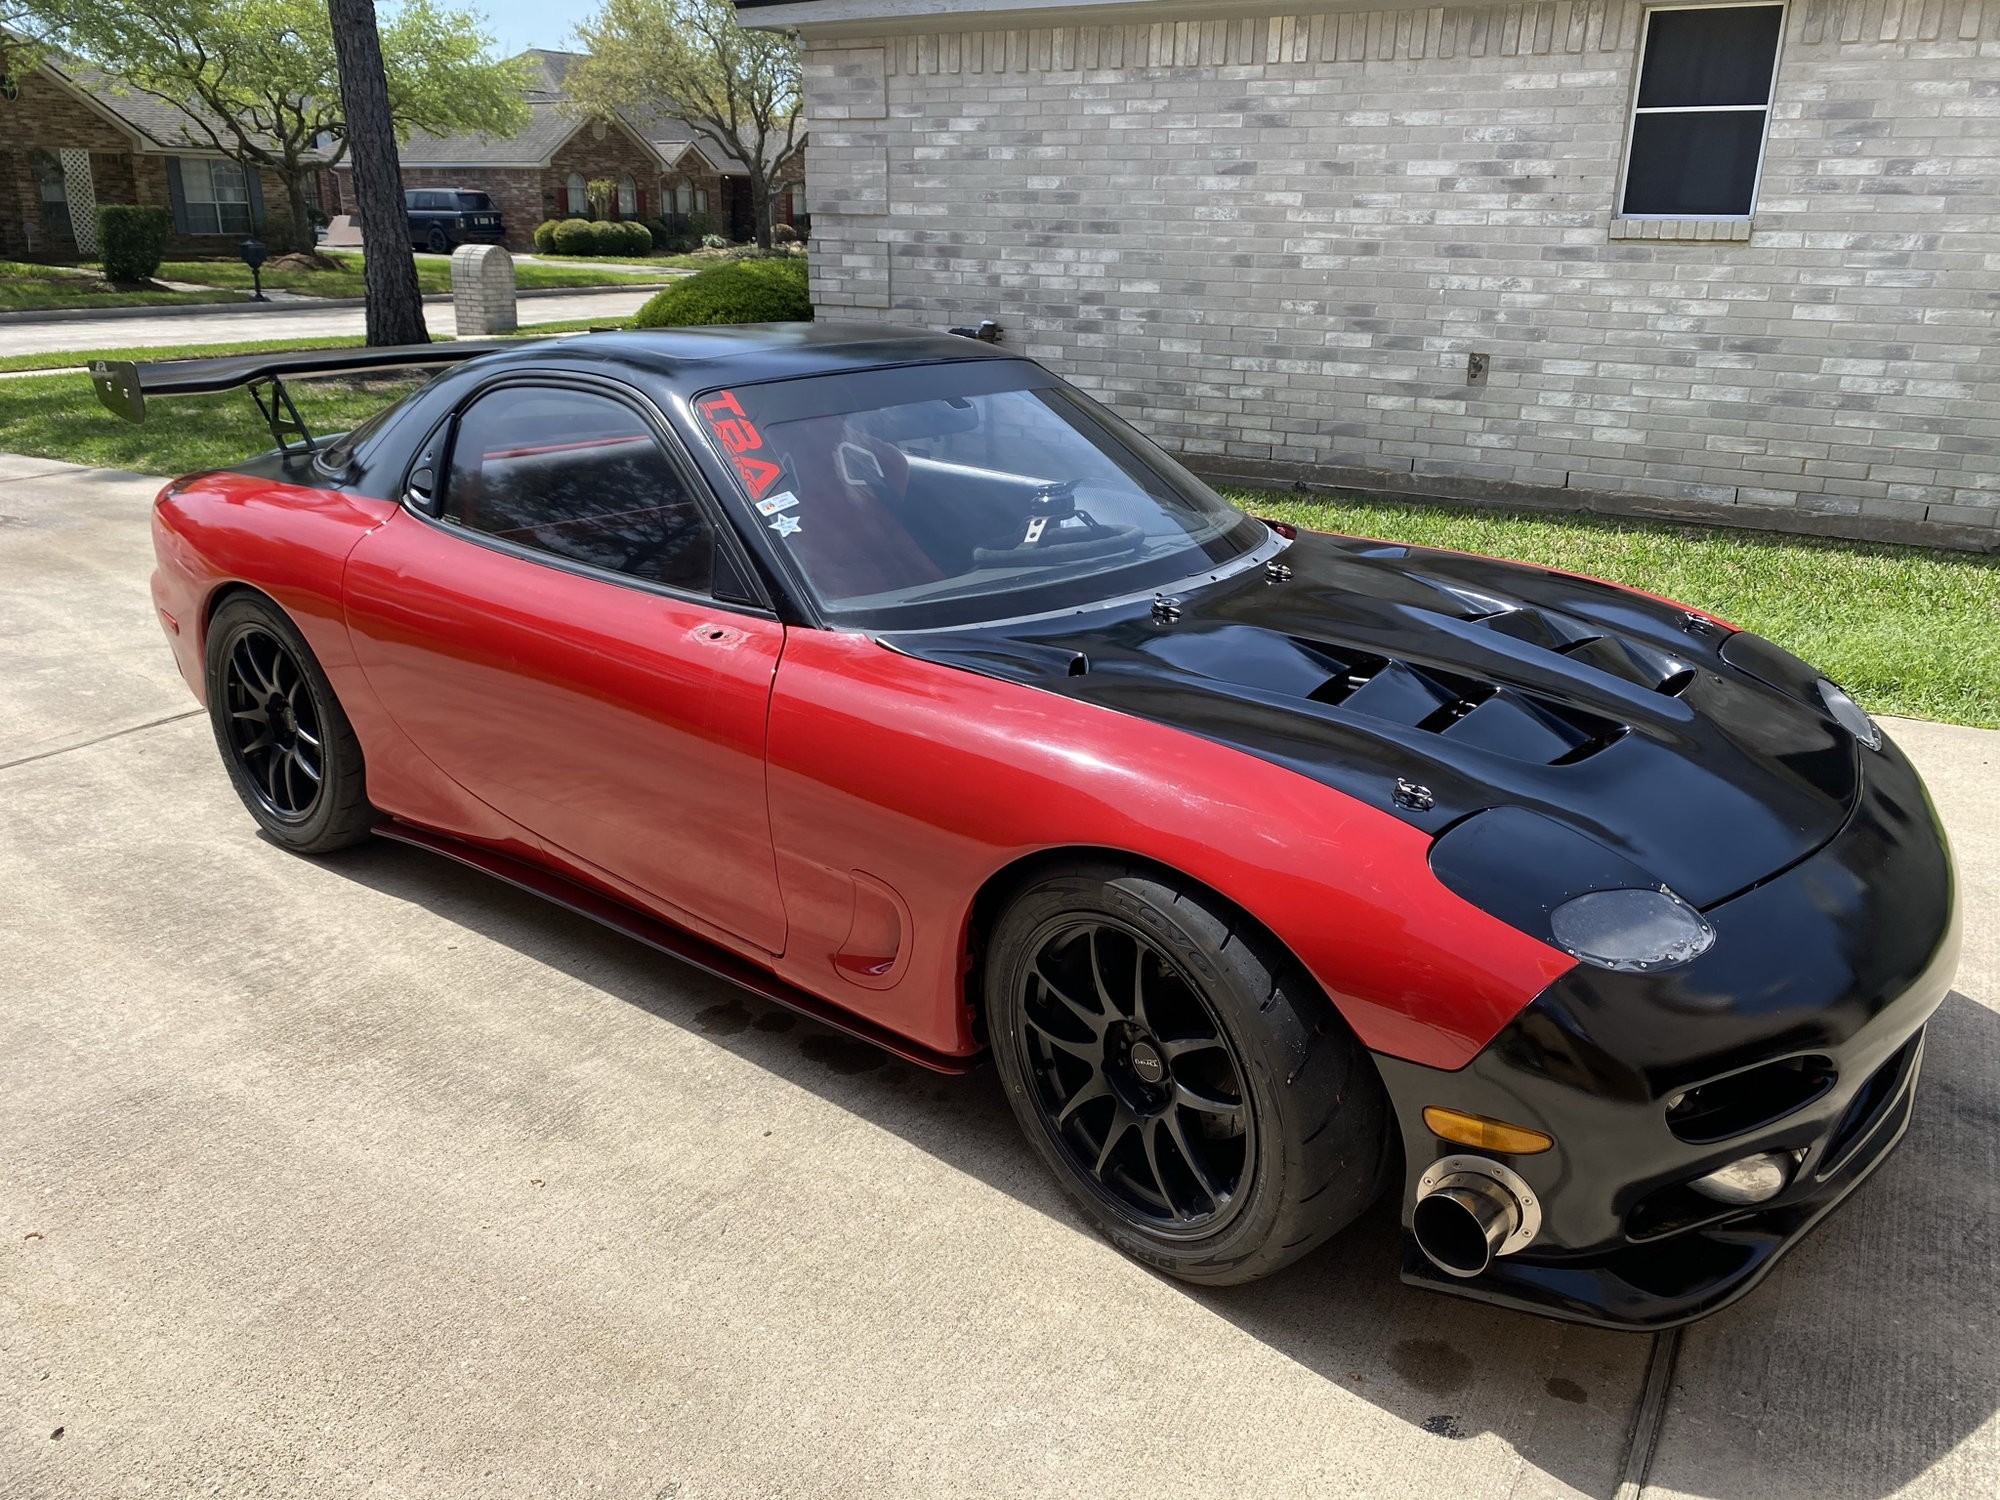 1993 Mazda RX-7 - 1993 RX-7 793RWHP Turbo/LS 6.0 Stroker (408) Proven 200MPH Car - Used - VIN JM1FD331XP0208496 - 8 cyl - 2WD - Manual - Coupe - Red - Pearland, TX 77581, United States